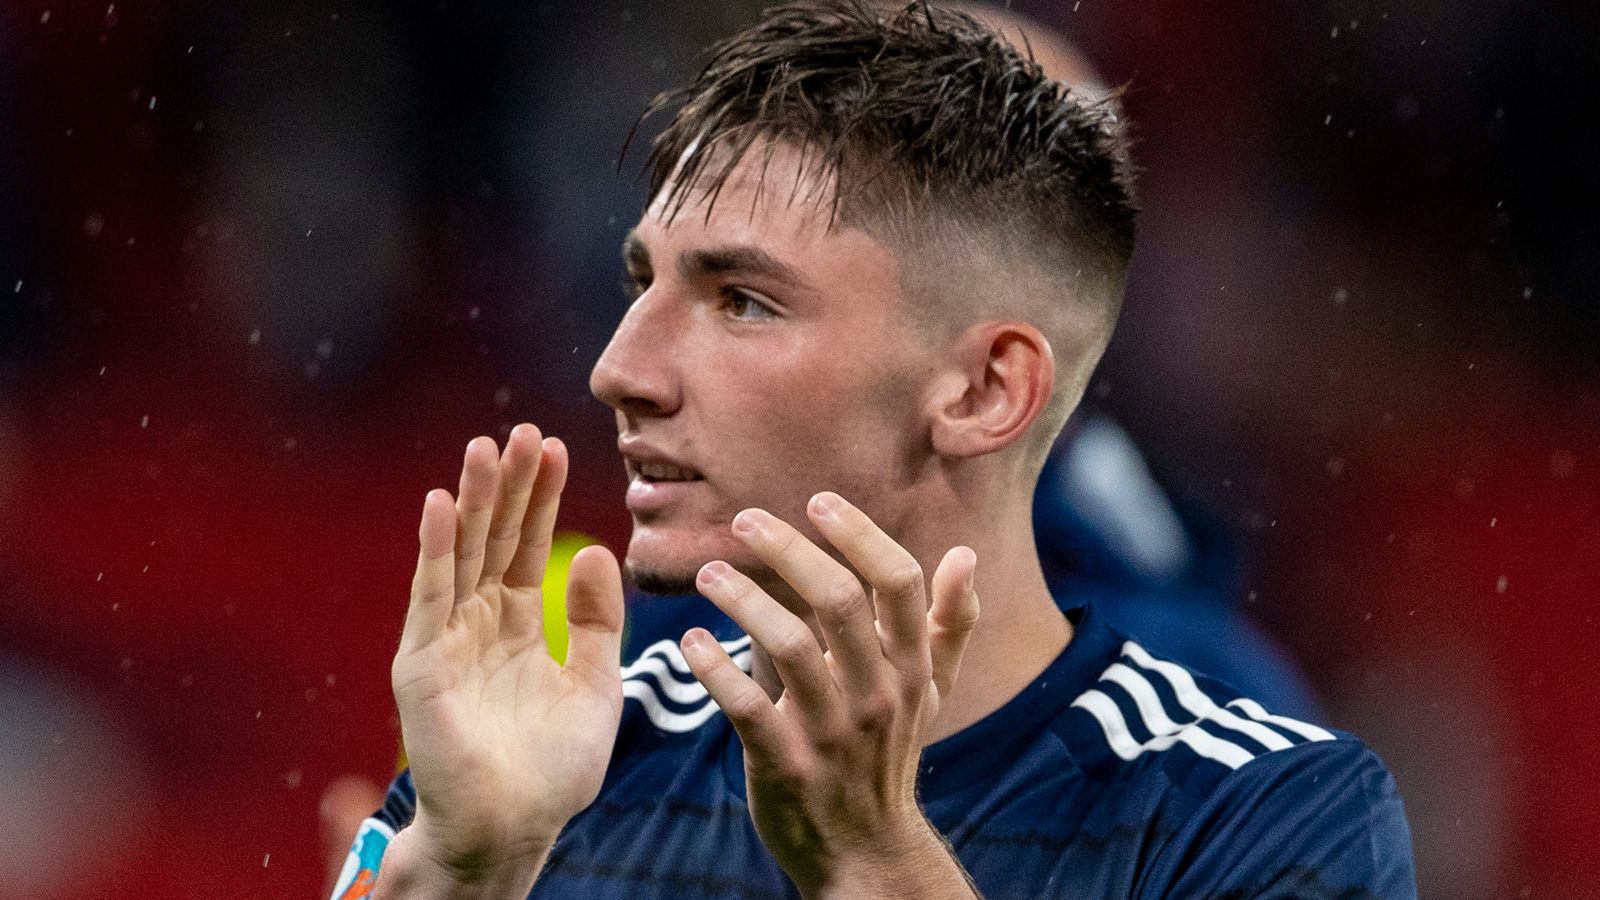 Scotland Euro 2020 Reporter Notebook Billy Gilmour Absence Could Be Most Gut Wrenching Scotland Misfortune Lenexworldlenexworld